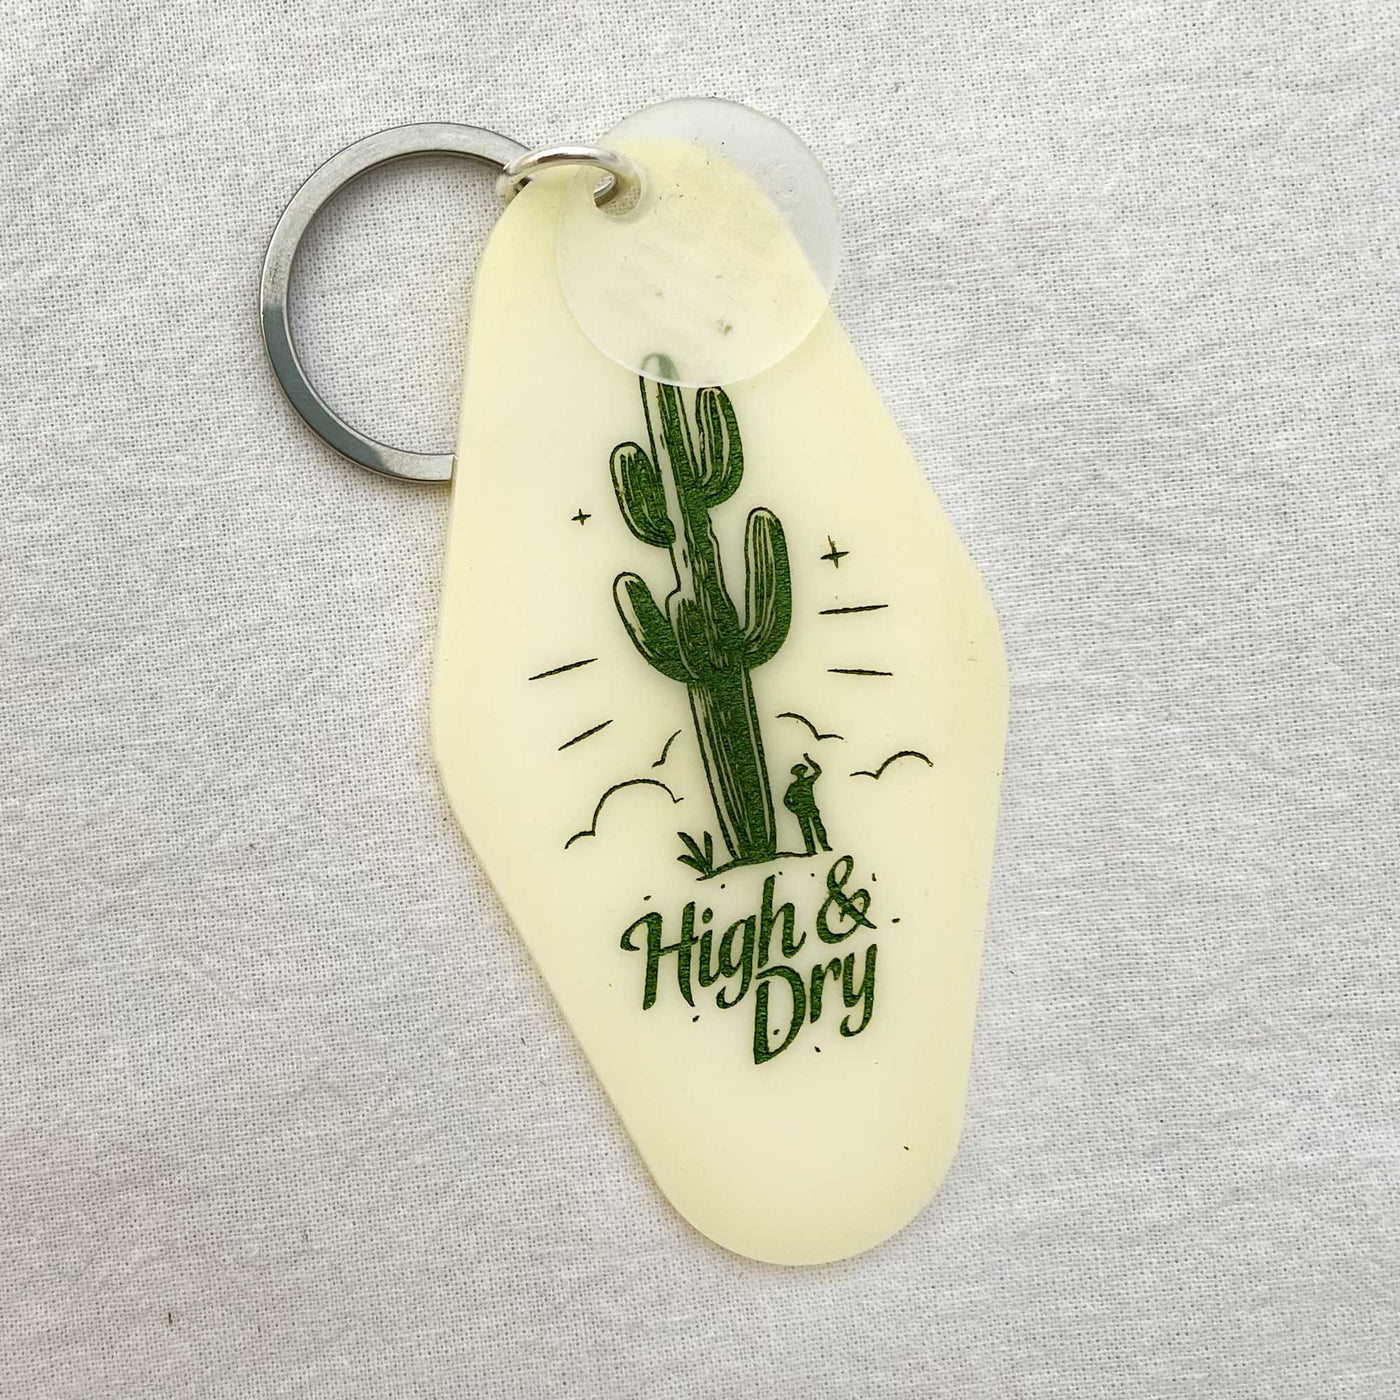 High and Dry Key Tag